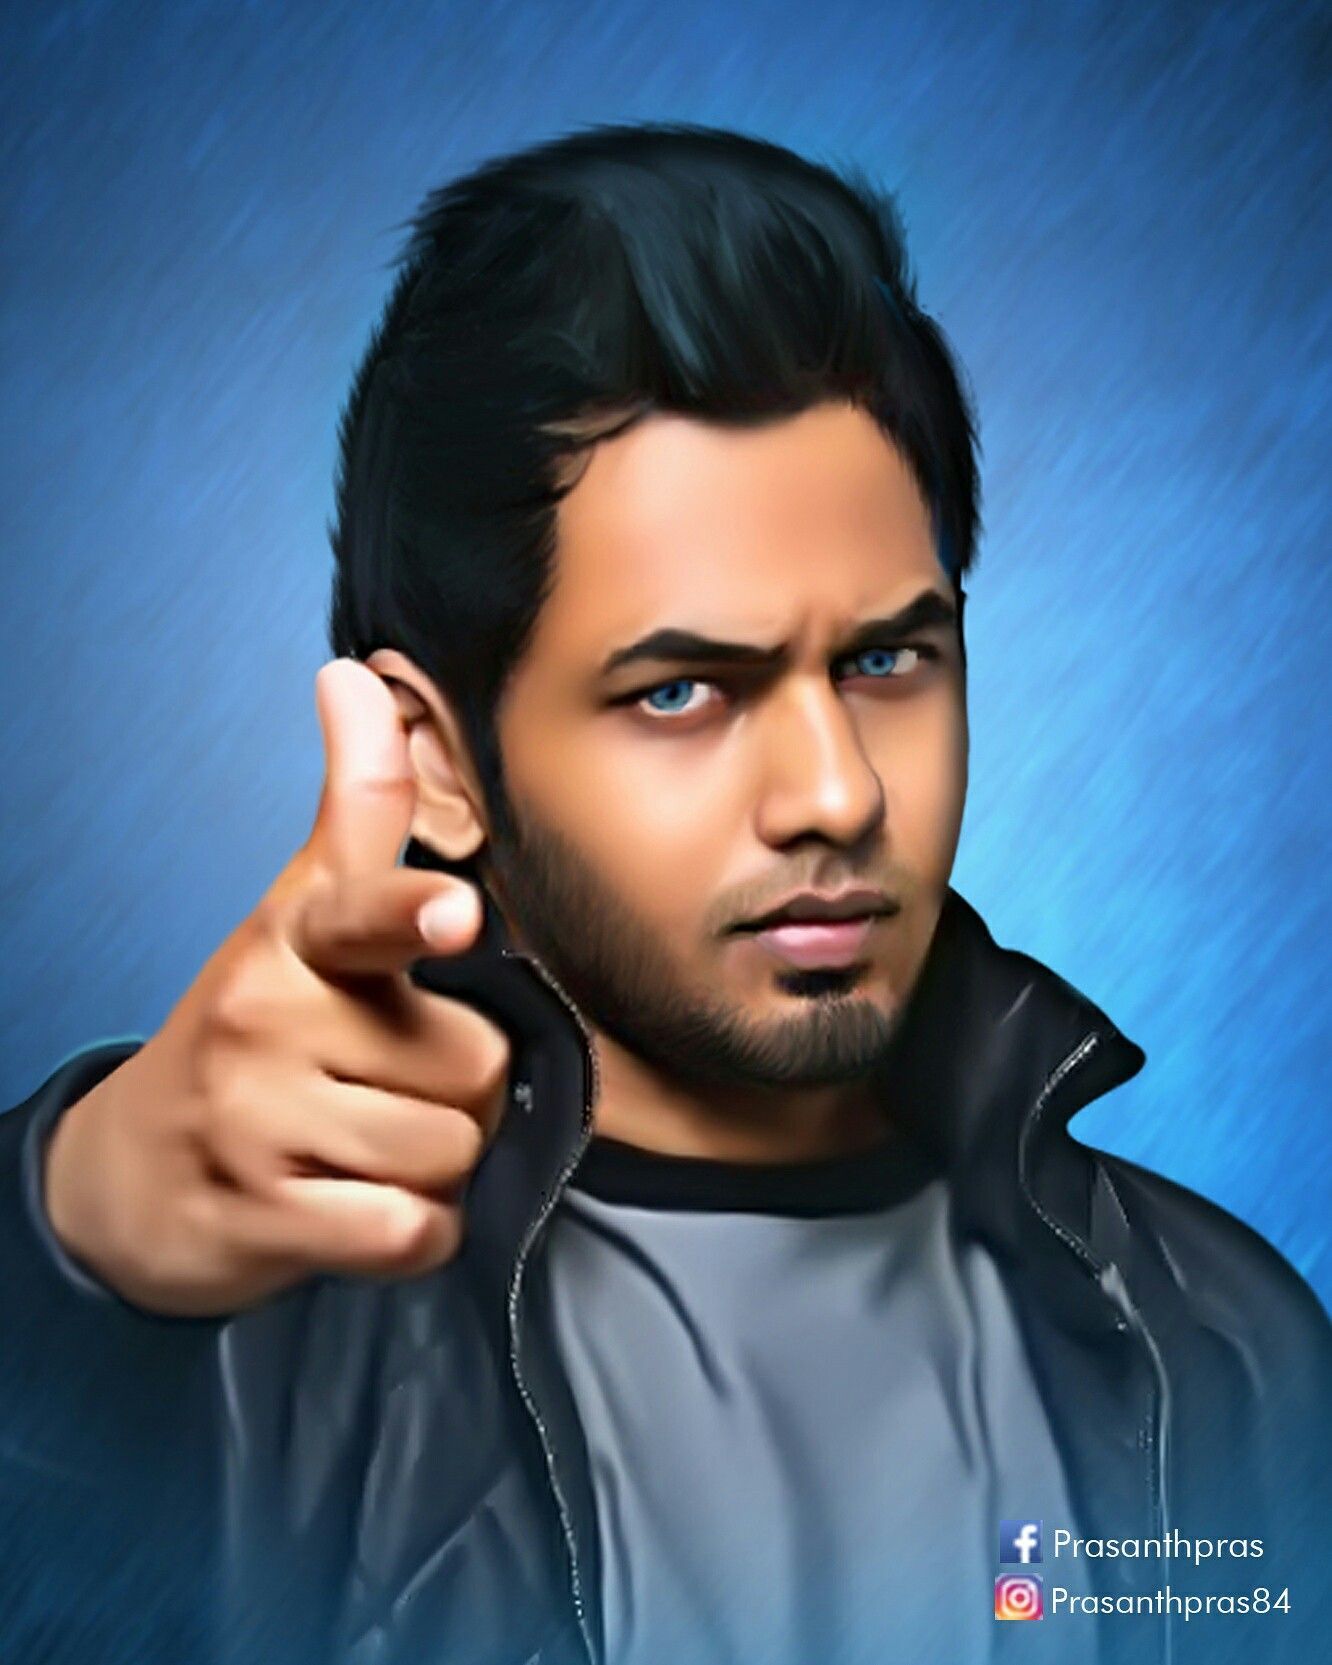 Hip Hop Tamizha Images Wallpapers